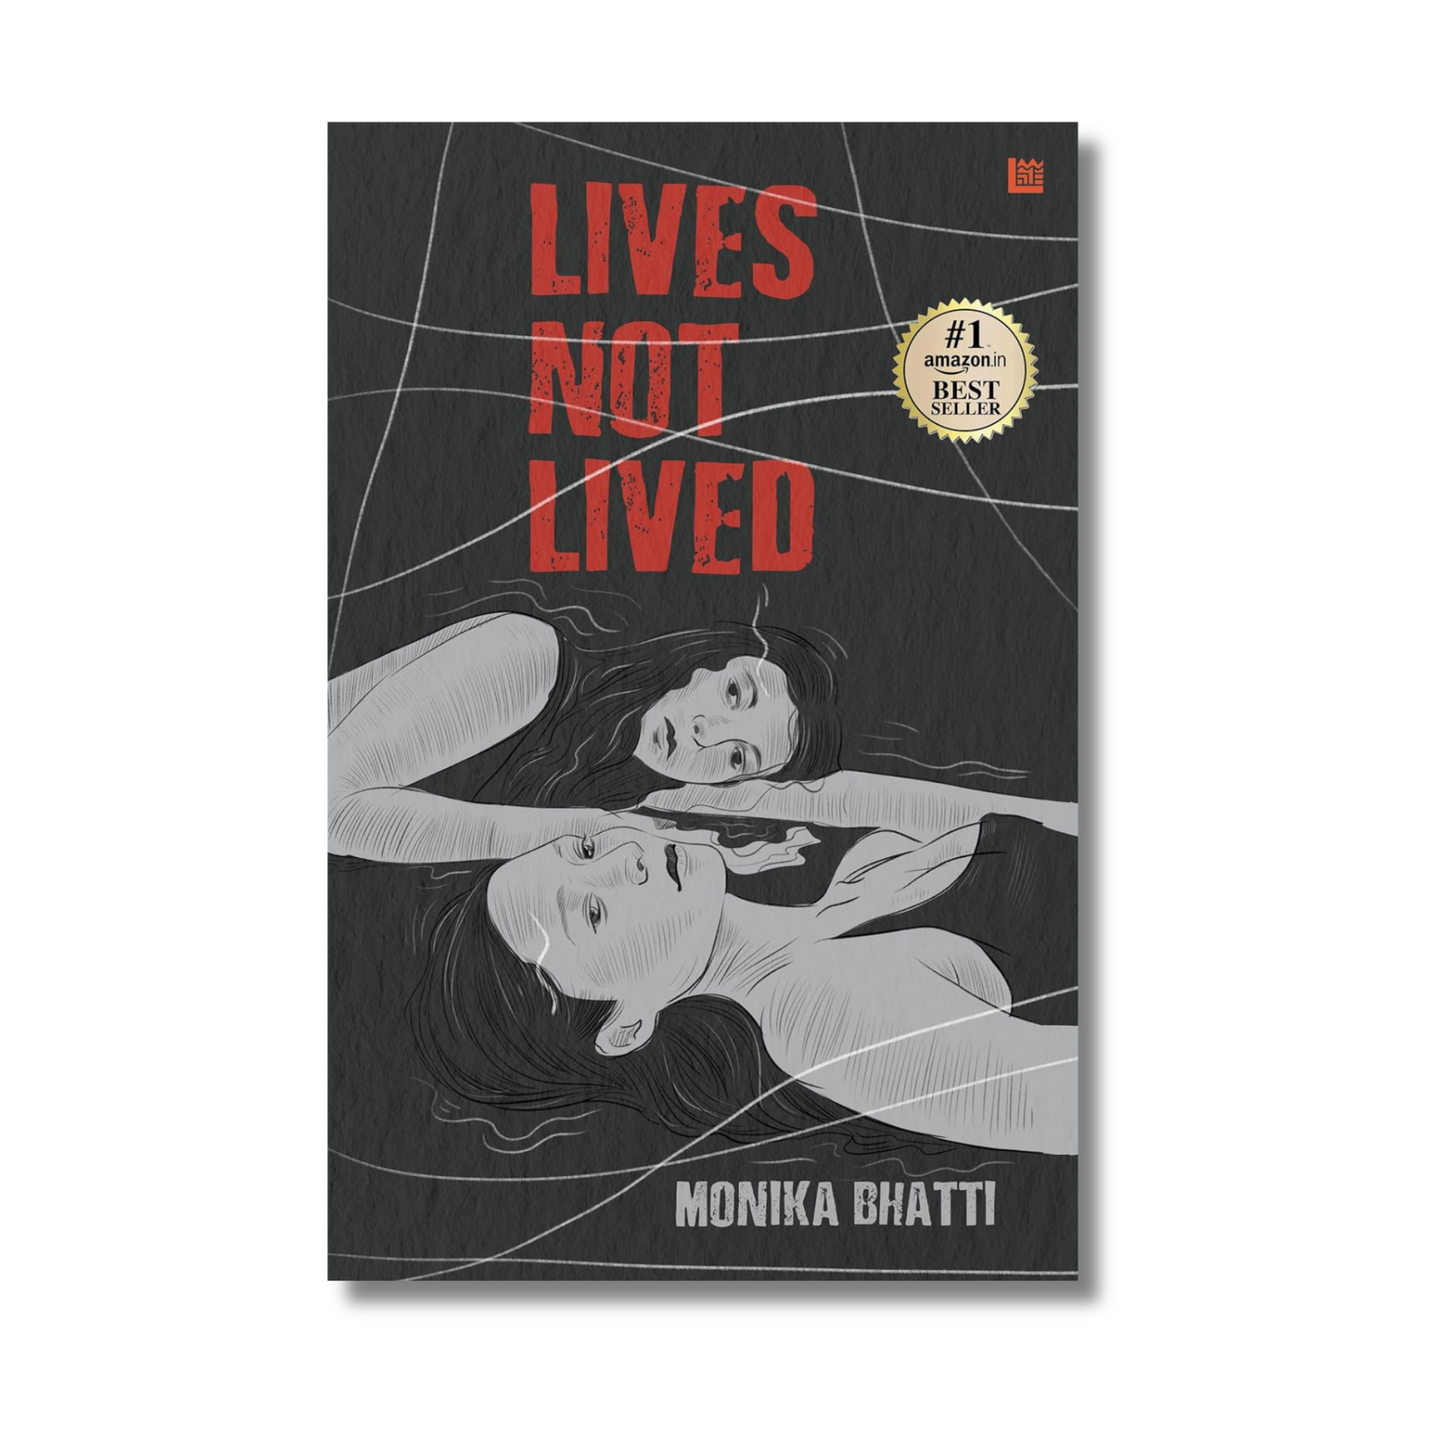 Lives Not Lived by Monika Bhatti (Paperback)